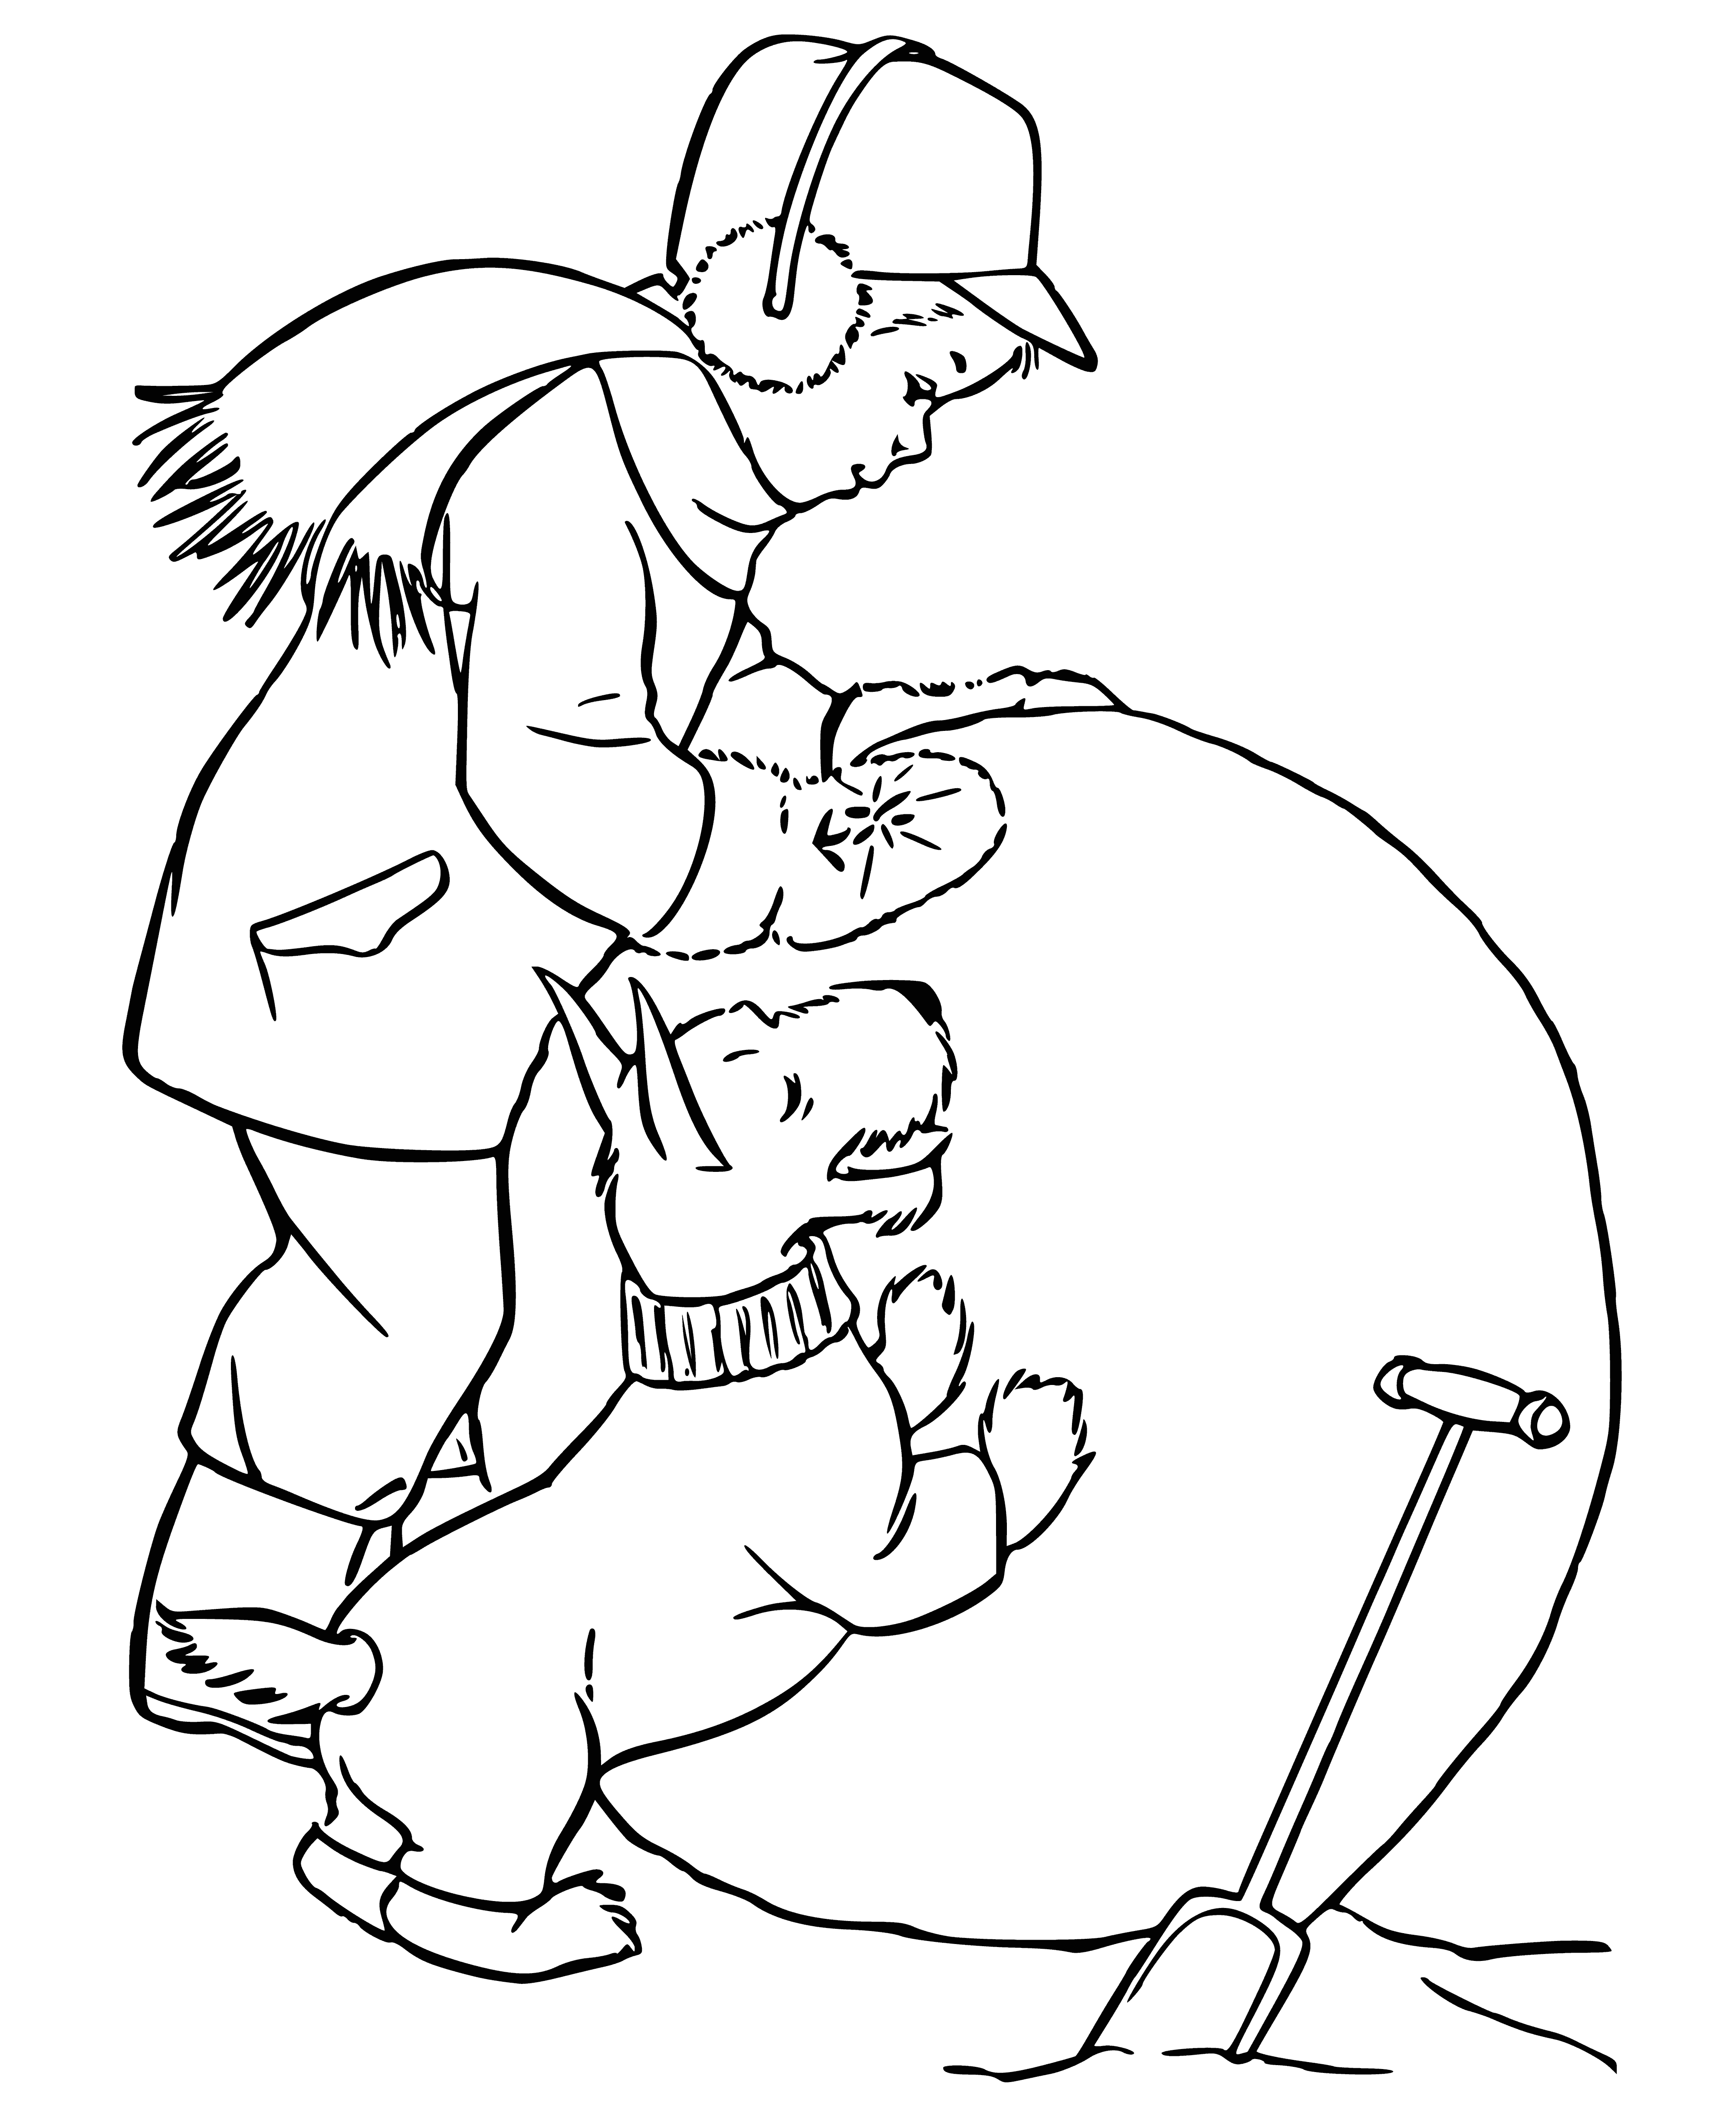 coloring page: Boy happily rolling huge snowball in a snow-covered meadow, sky a light blue.